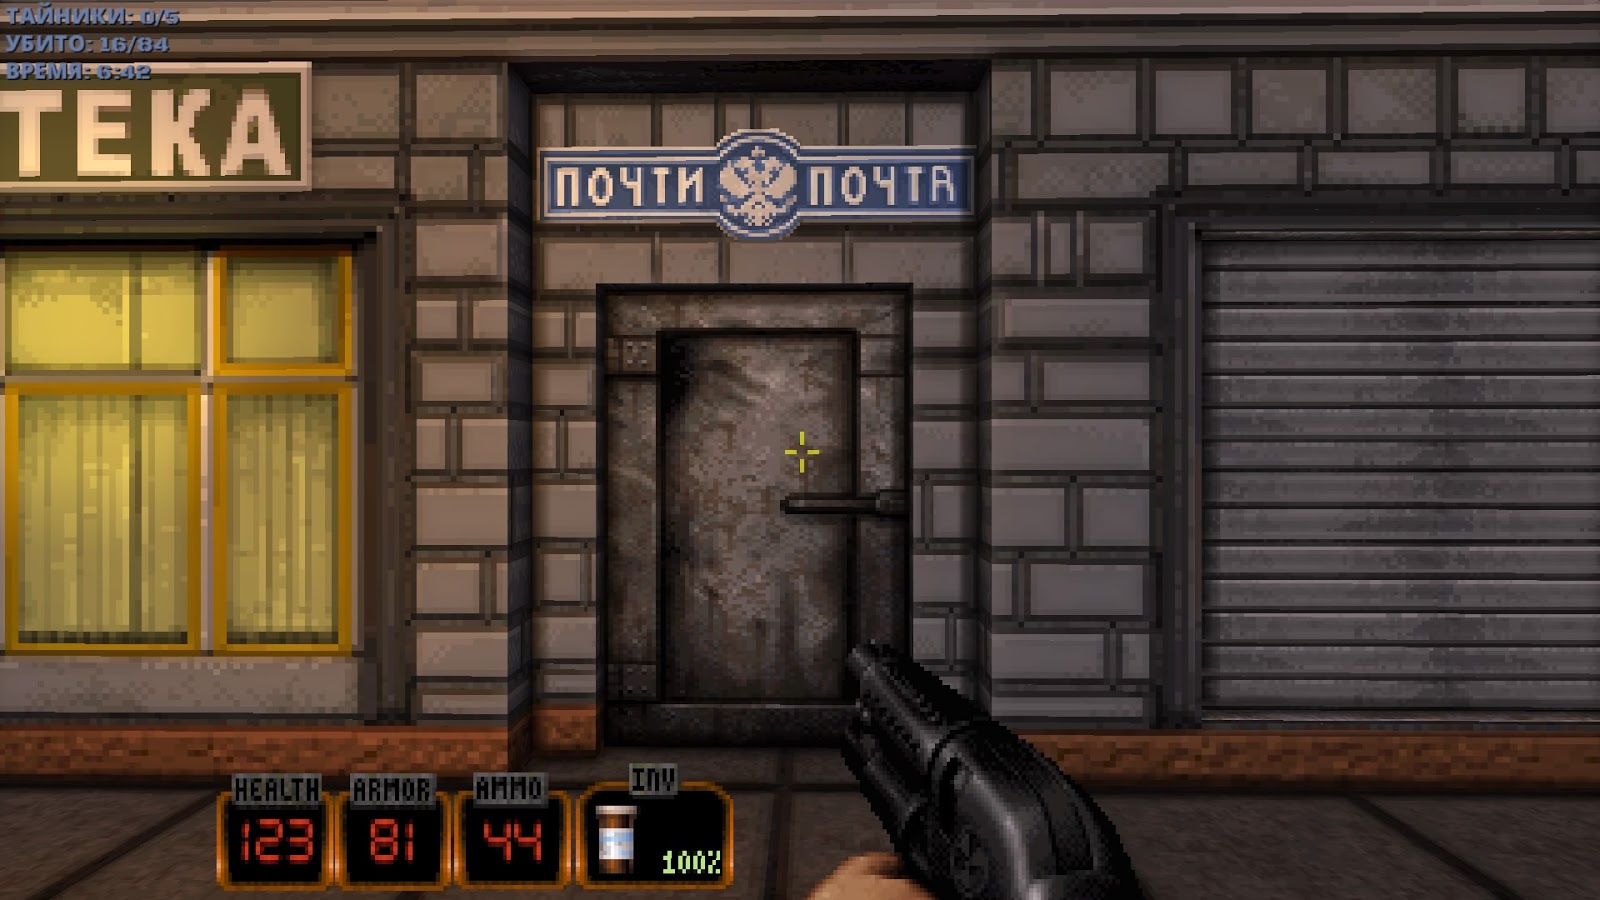 You are supposed to be here! 22 года релизу легендарной игры Duke Nukem 3D - 12